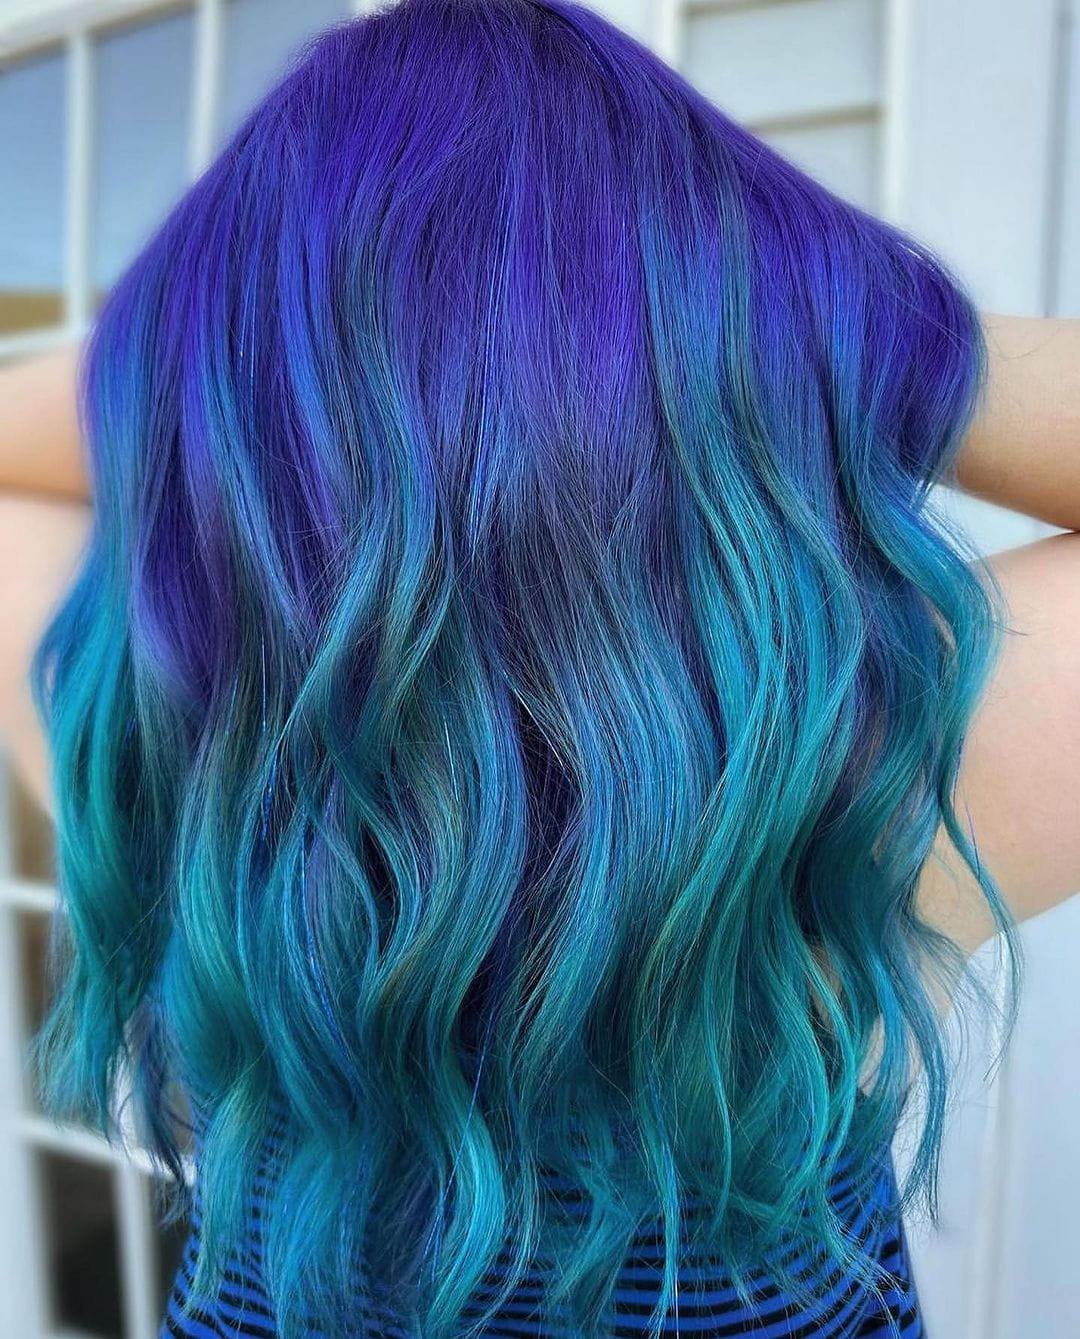 100+ Best Colorful Hair Ideas images 81